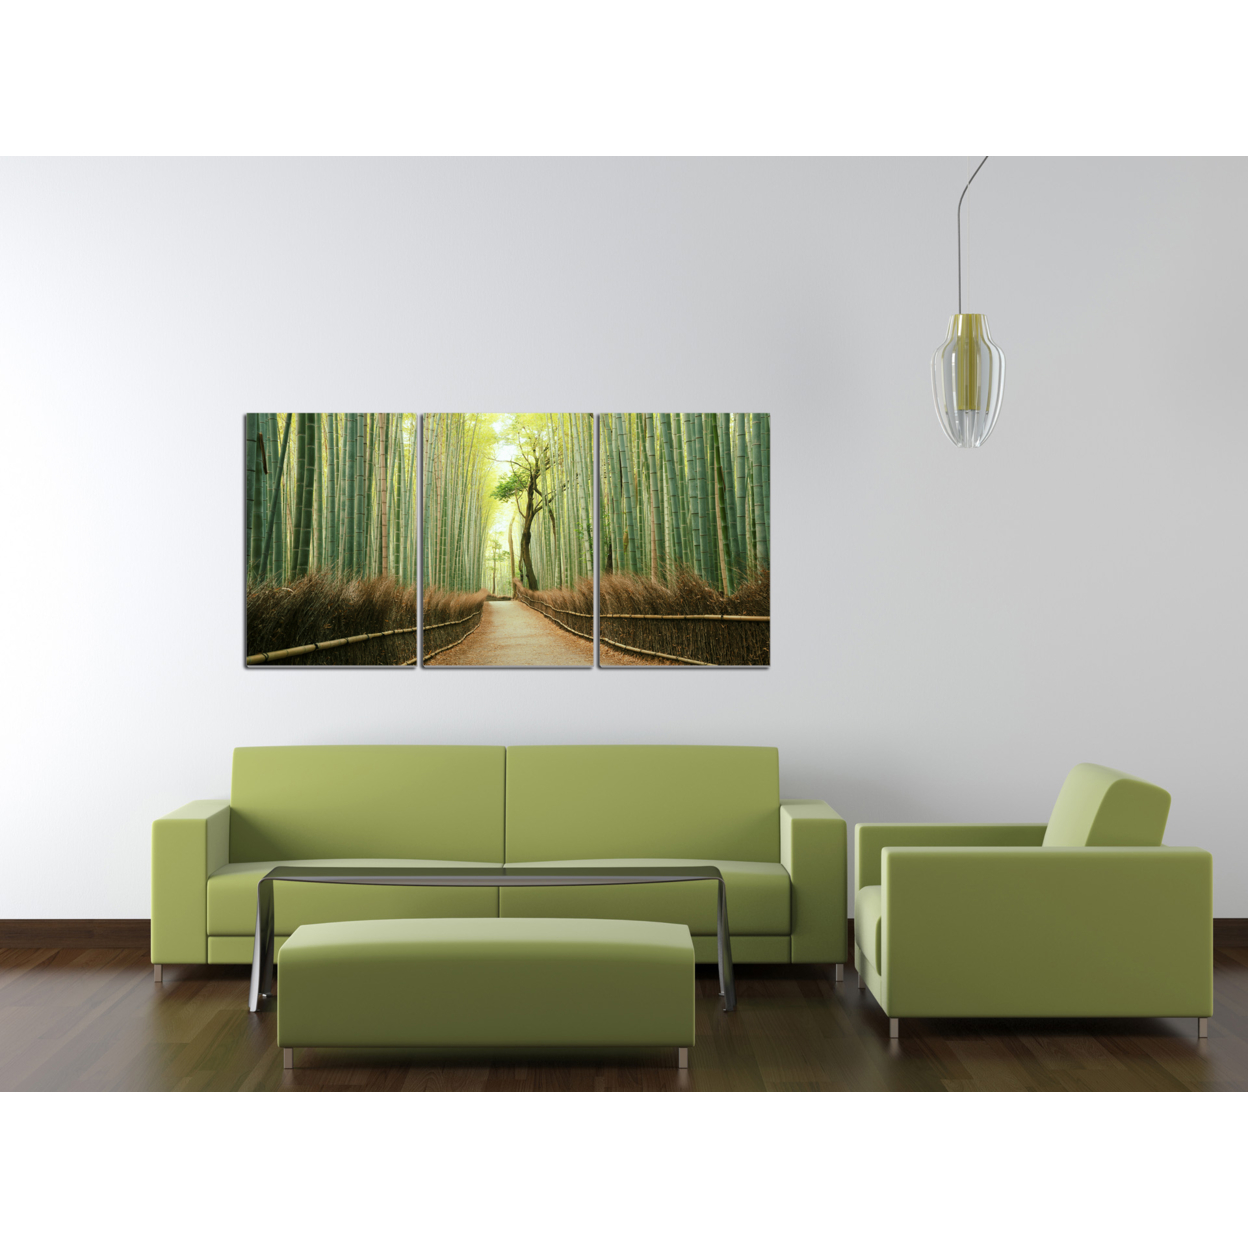 Pine Road 3 Piece Wrapped Canvas Wall Art Print 27.5x60 Inches